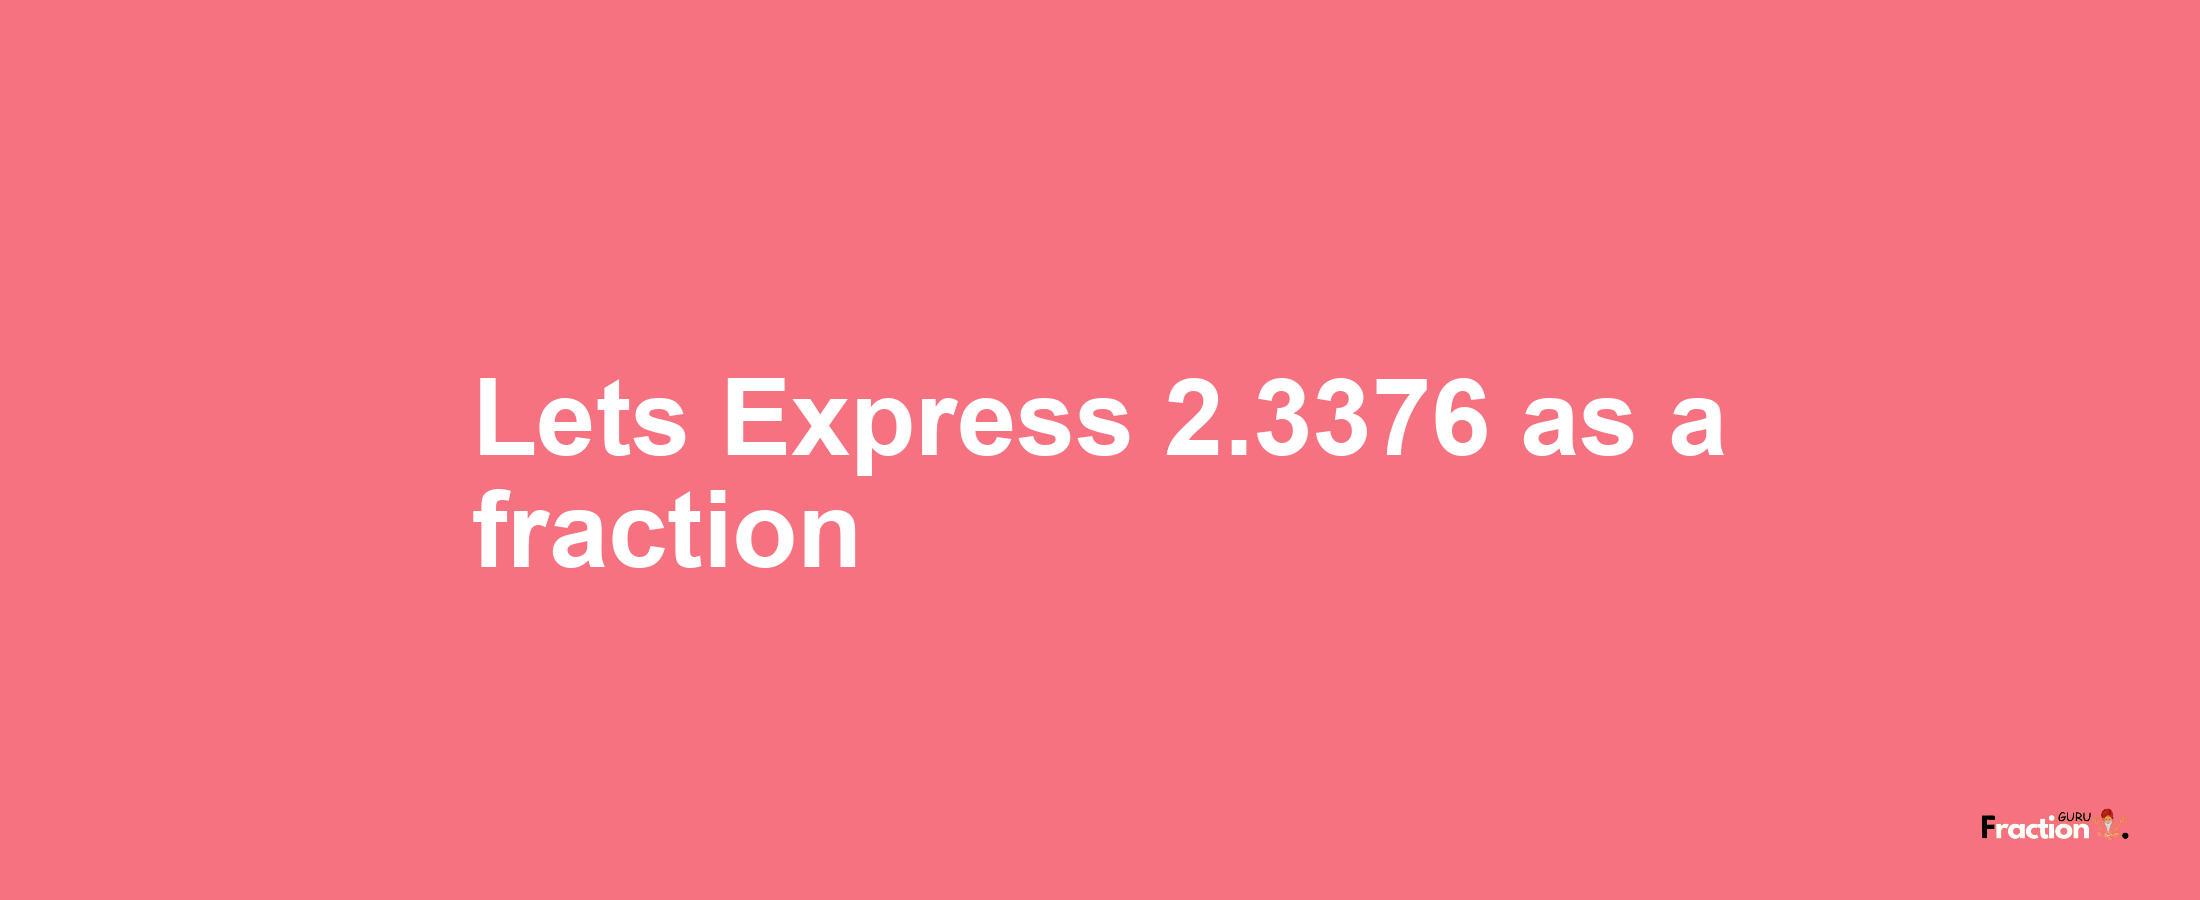 Lets Express 2.3376 as afraction